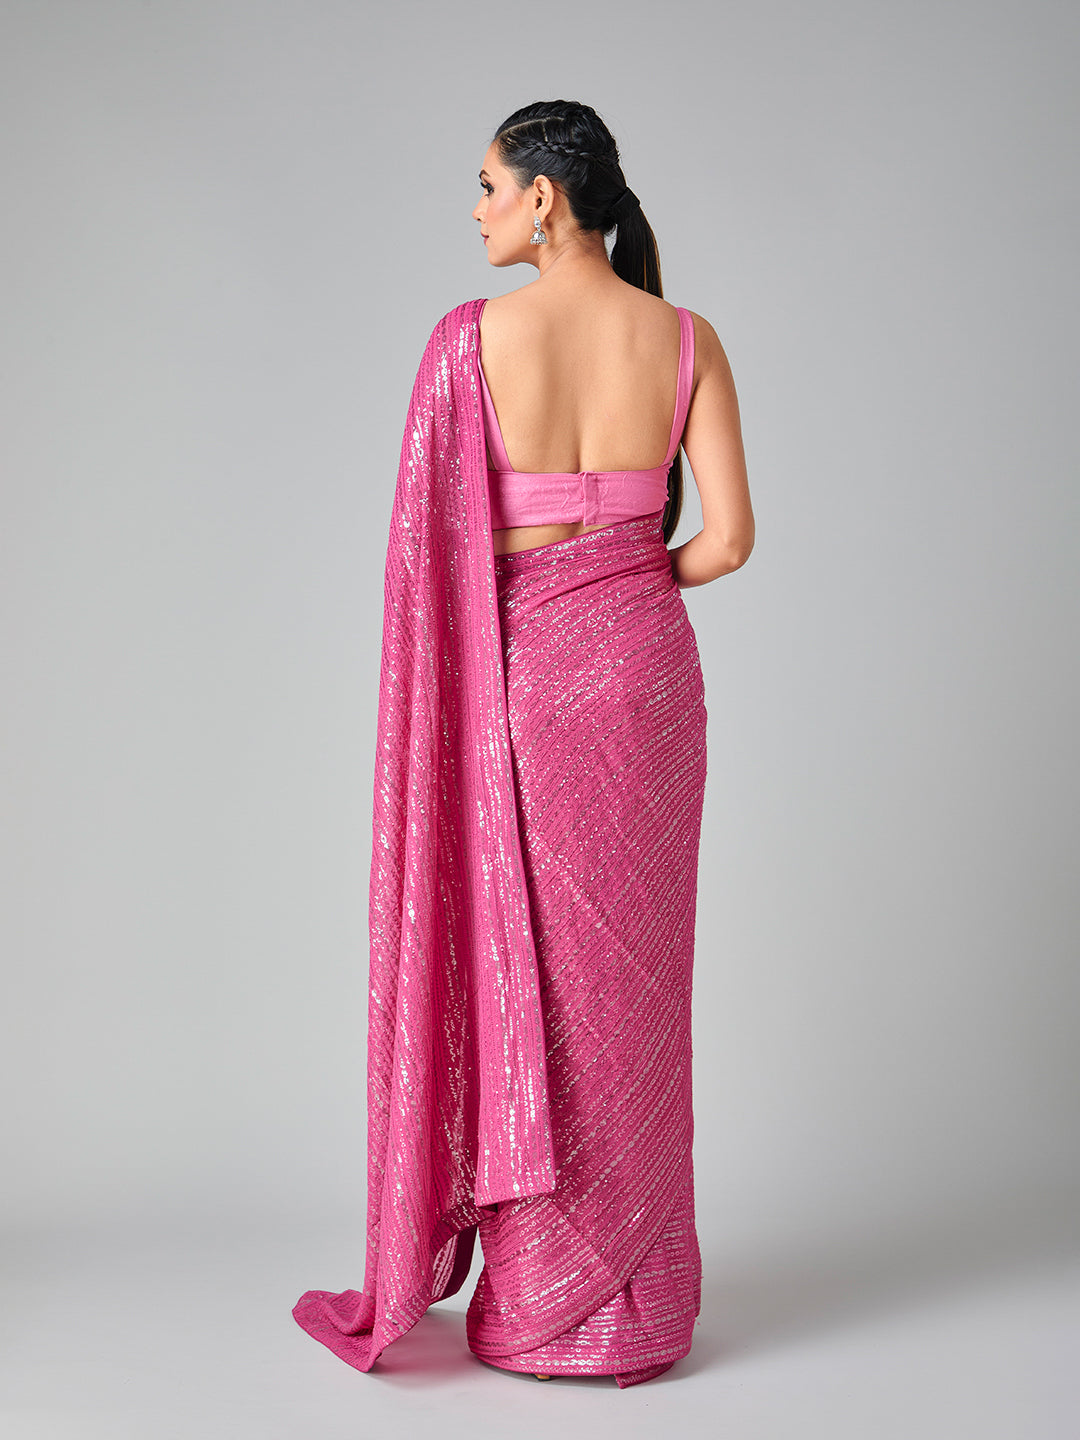 Shimmery Pink & Gold Sequin Saree